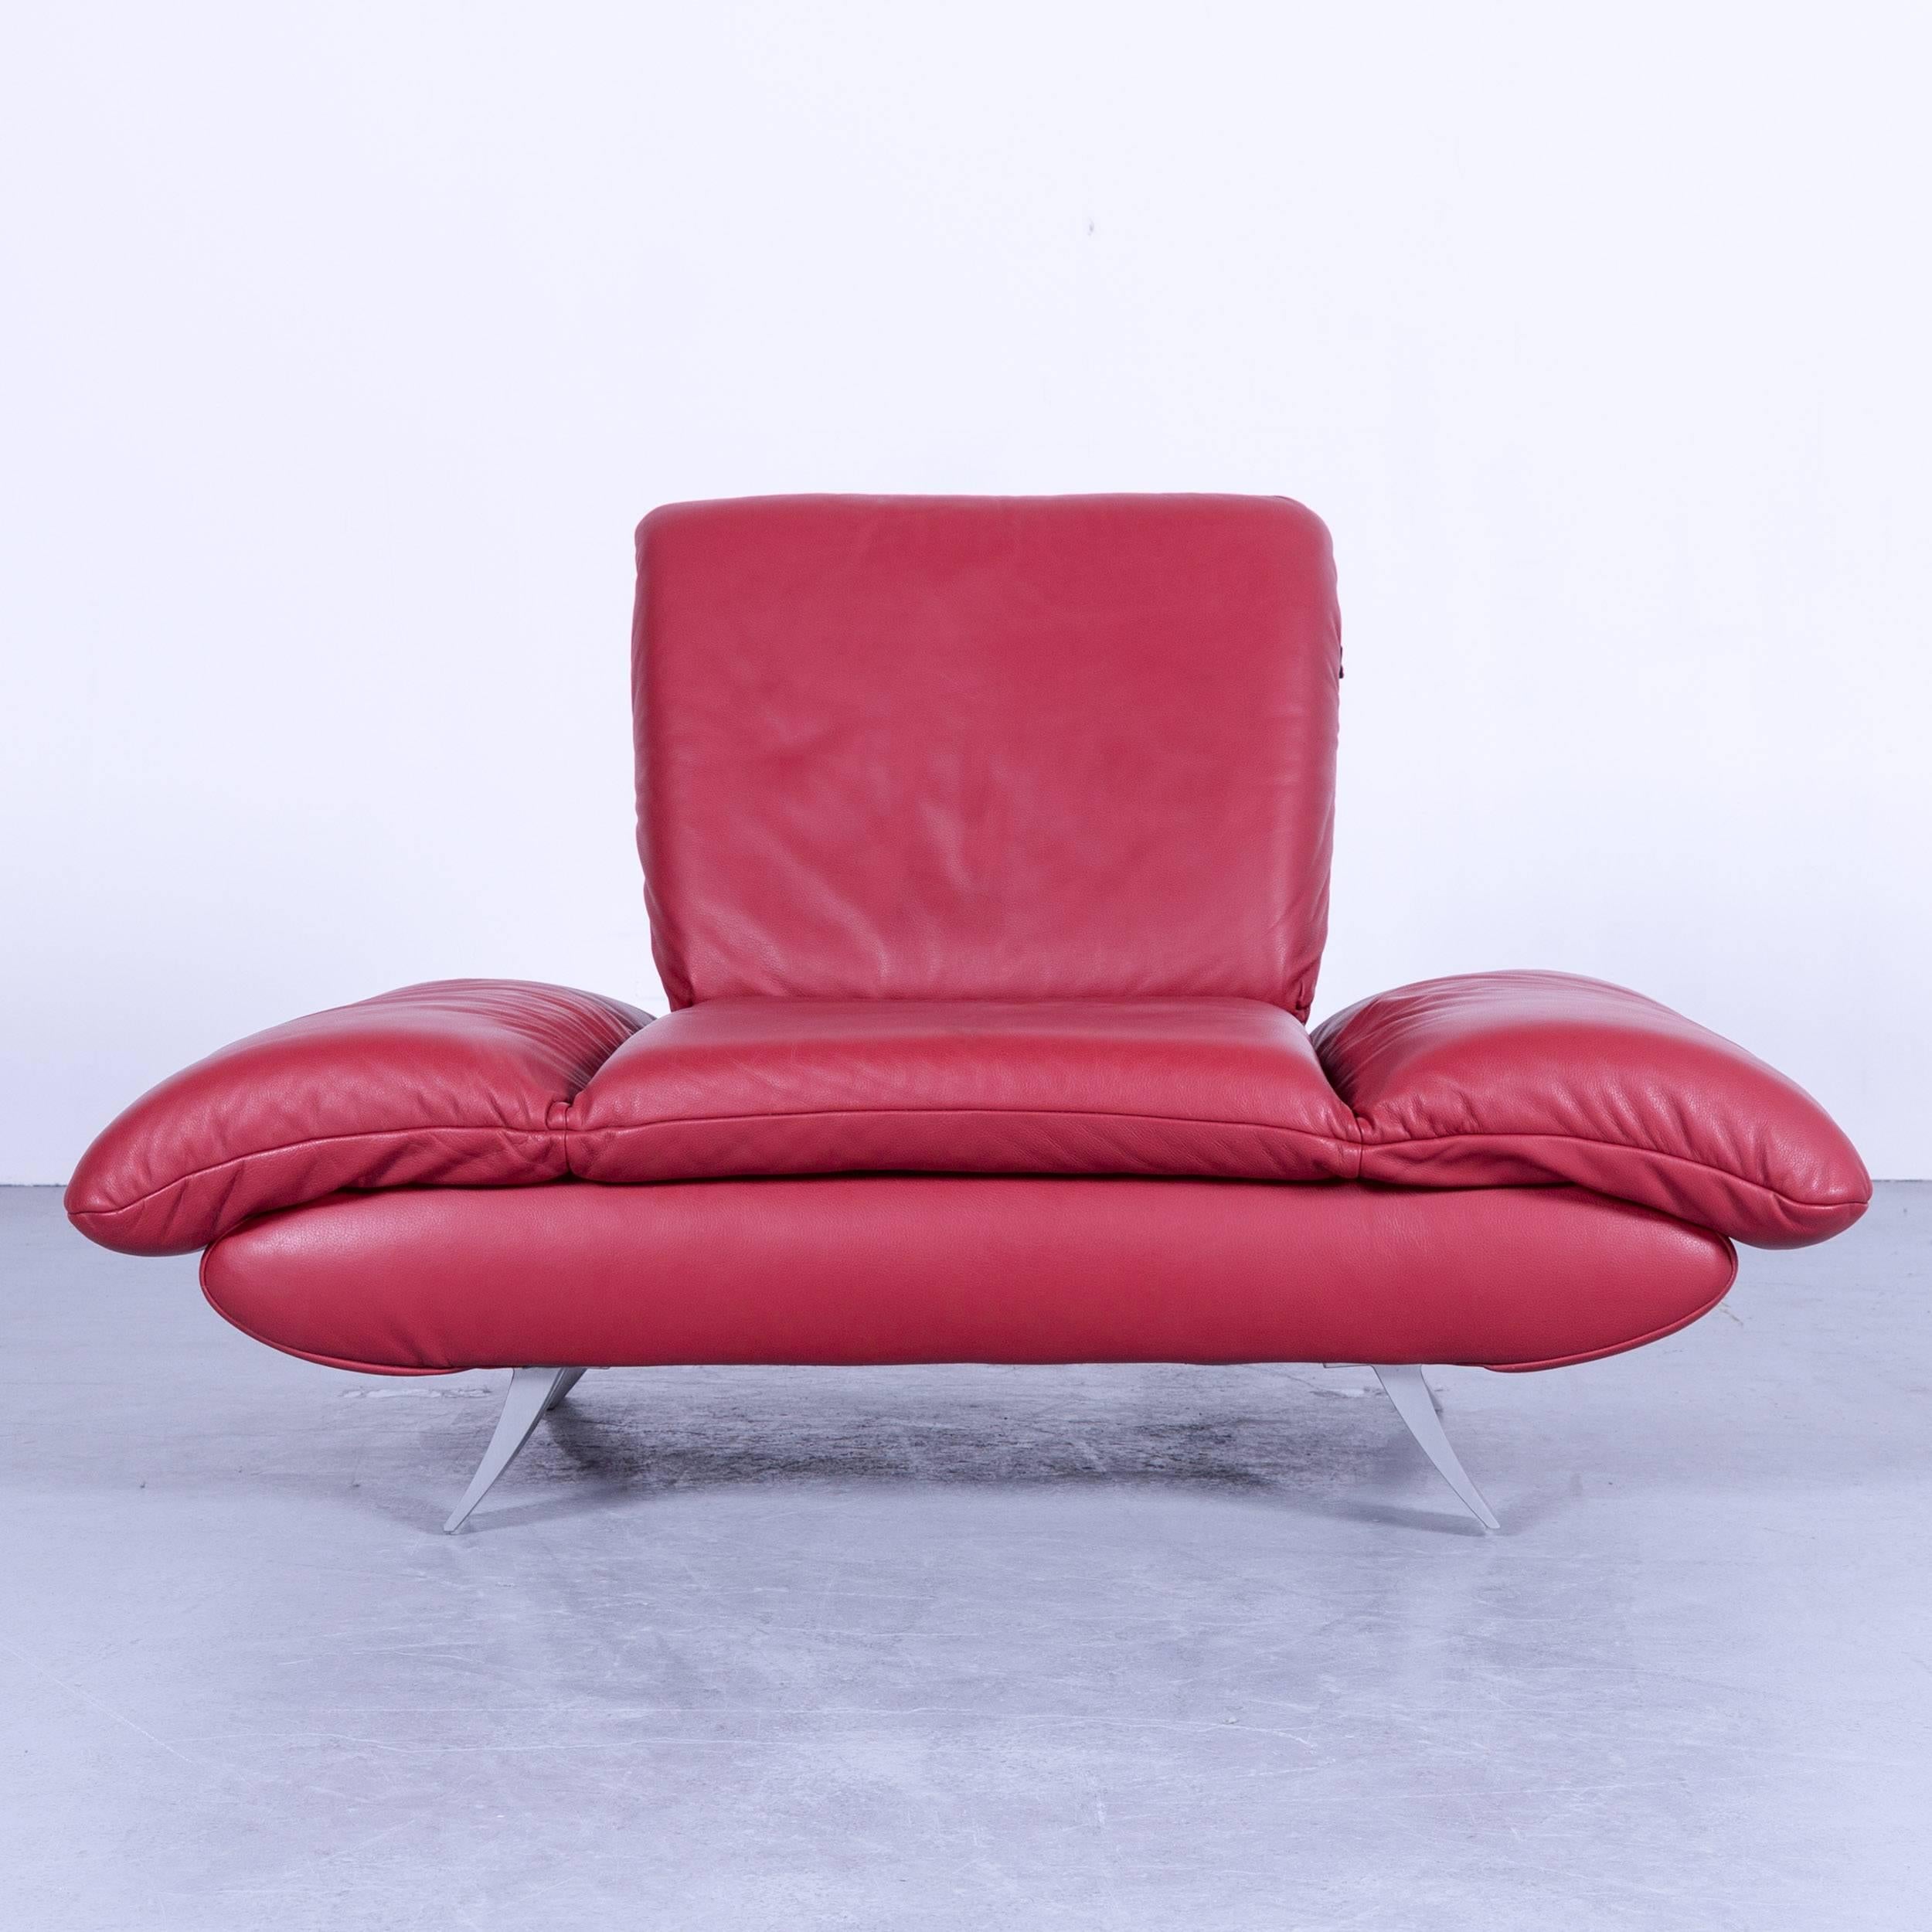 Koinor Rossini designer leather armchair red leather function one-seat in a minimalistic and modern design, with convenient functions, made for pure comfort and flexibility.